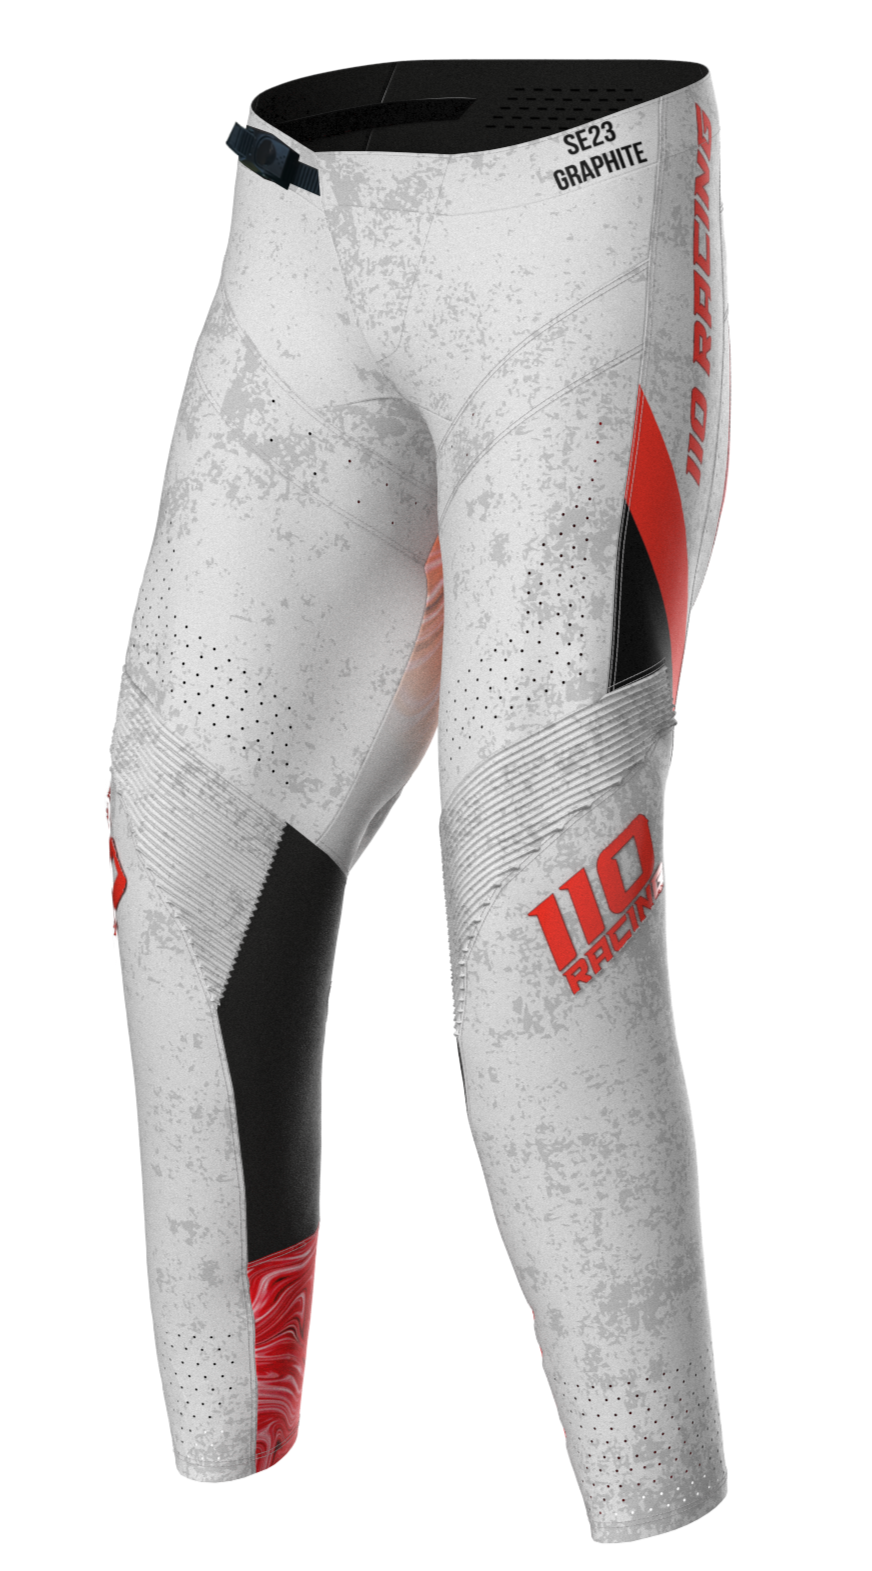 110 RACING // SE23 GRAPHITE YOUTH PANT GREY/RED